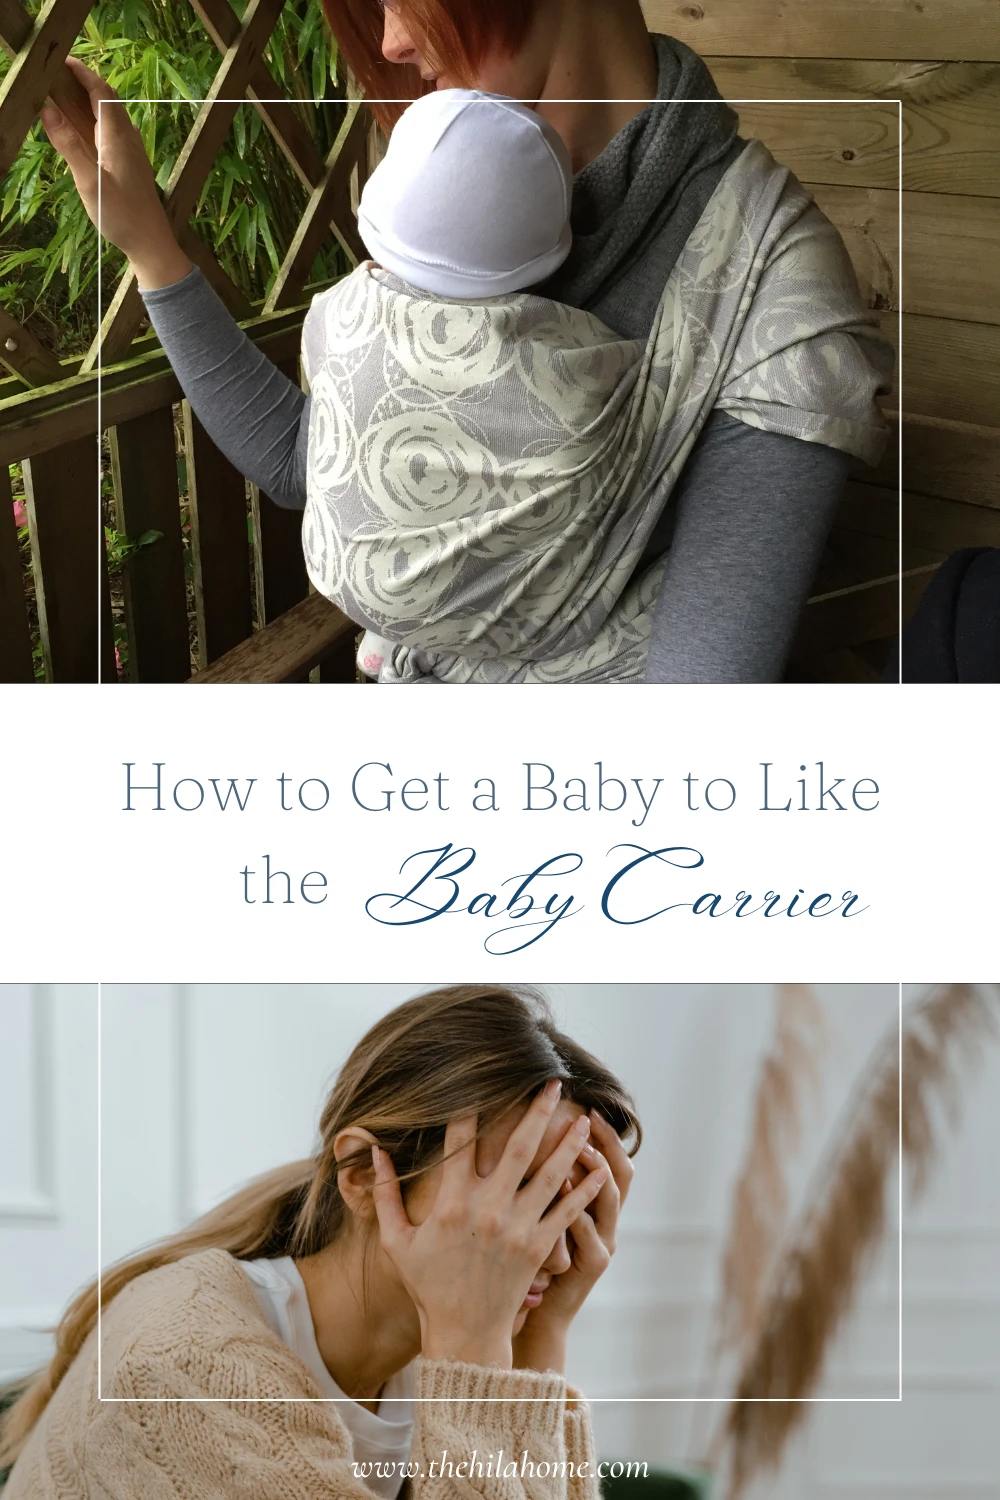 How to get a baby to like the baby carrier